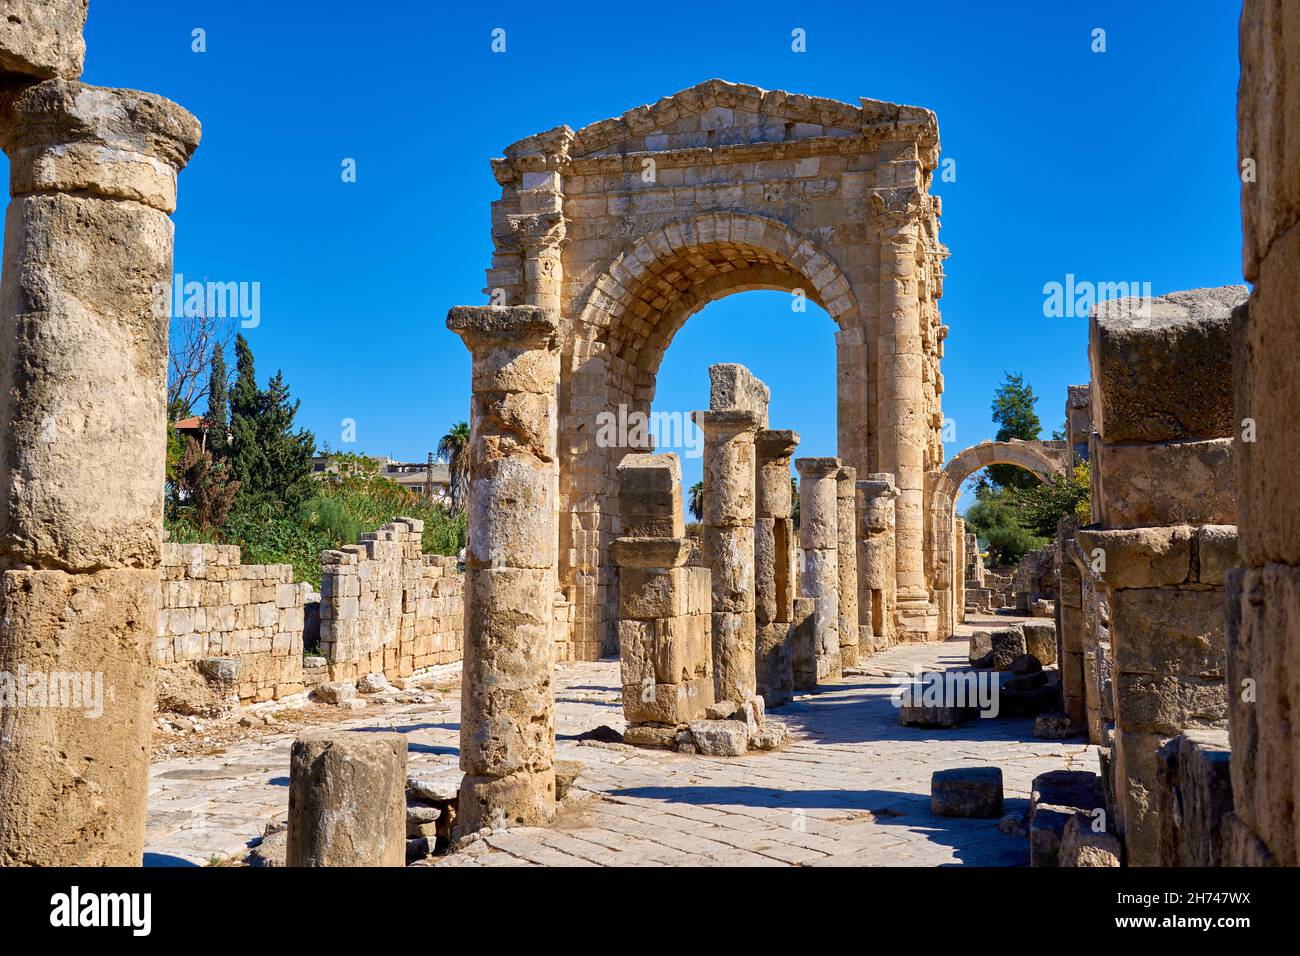 Triumphal arch of Tyre  at Hippodrome Stock Photo